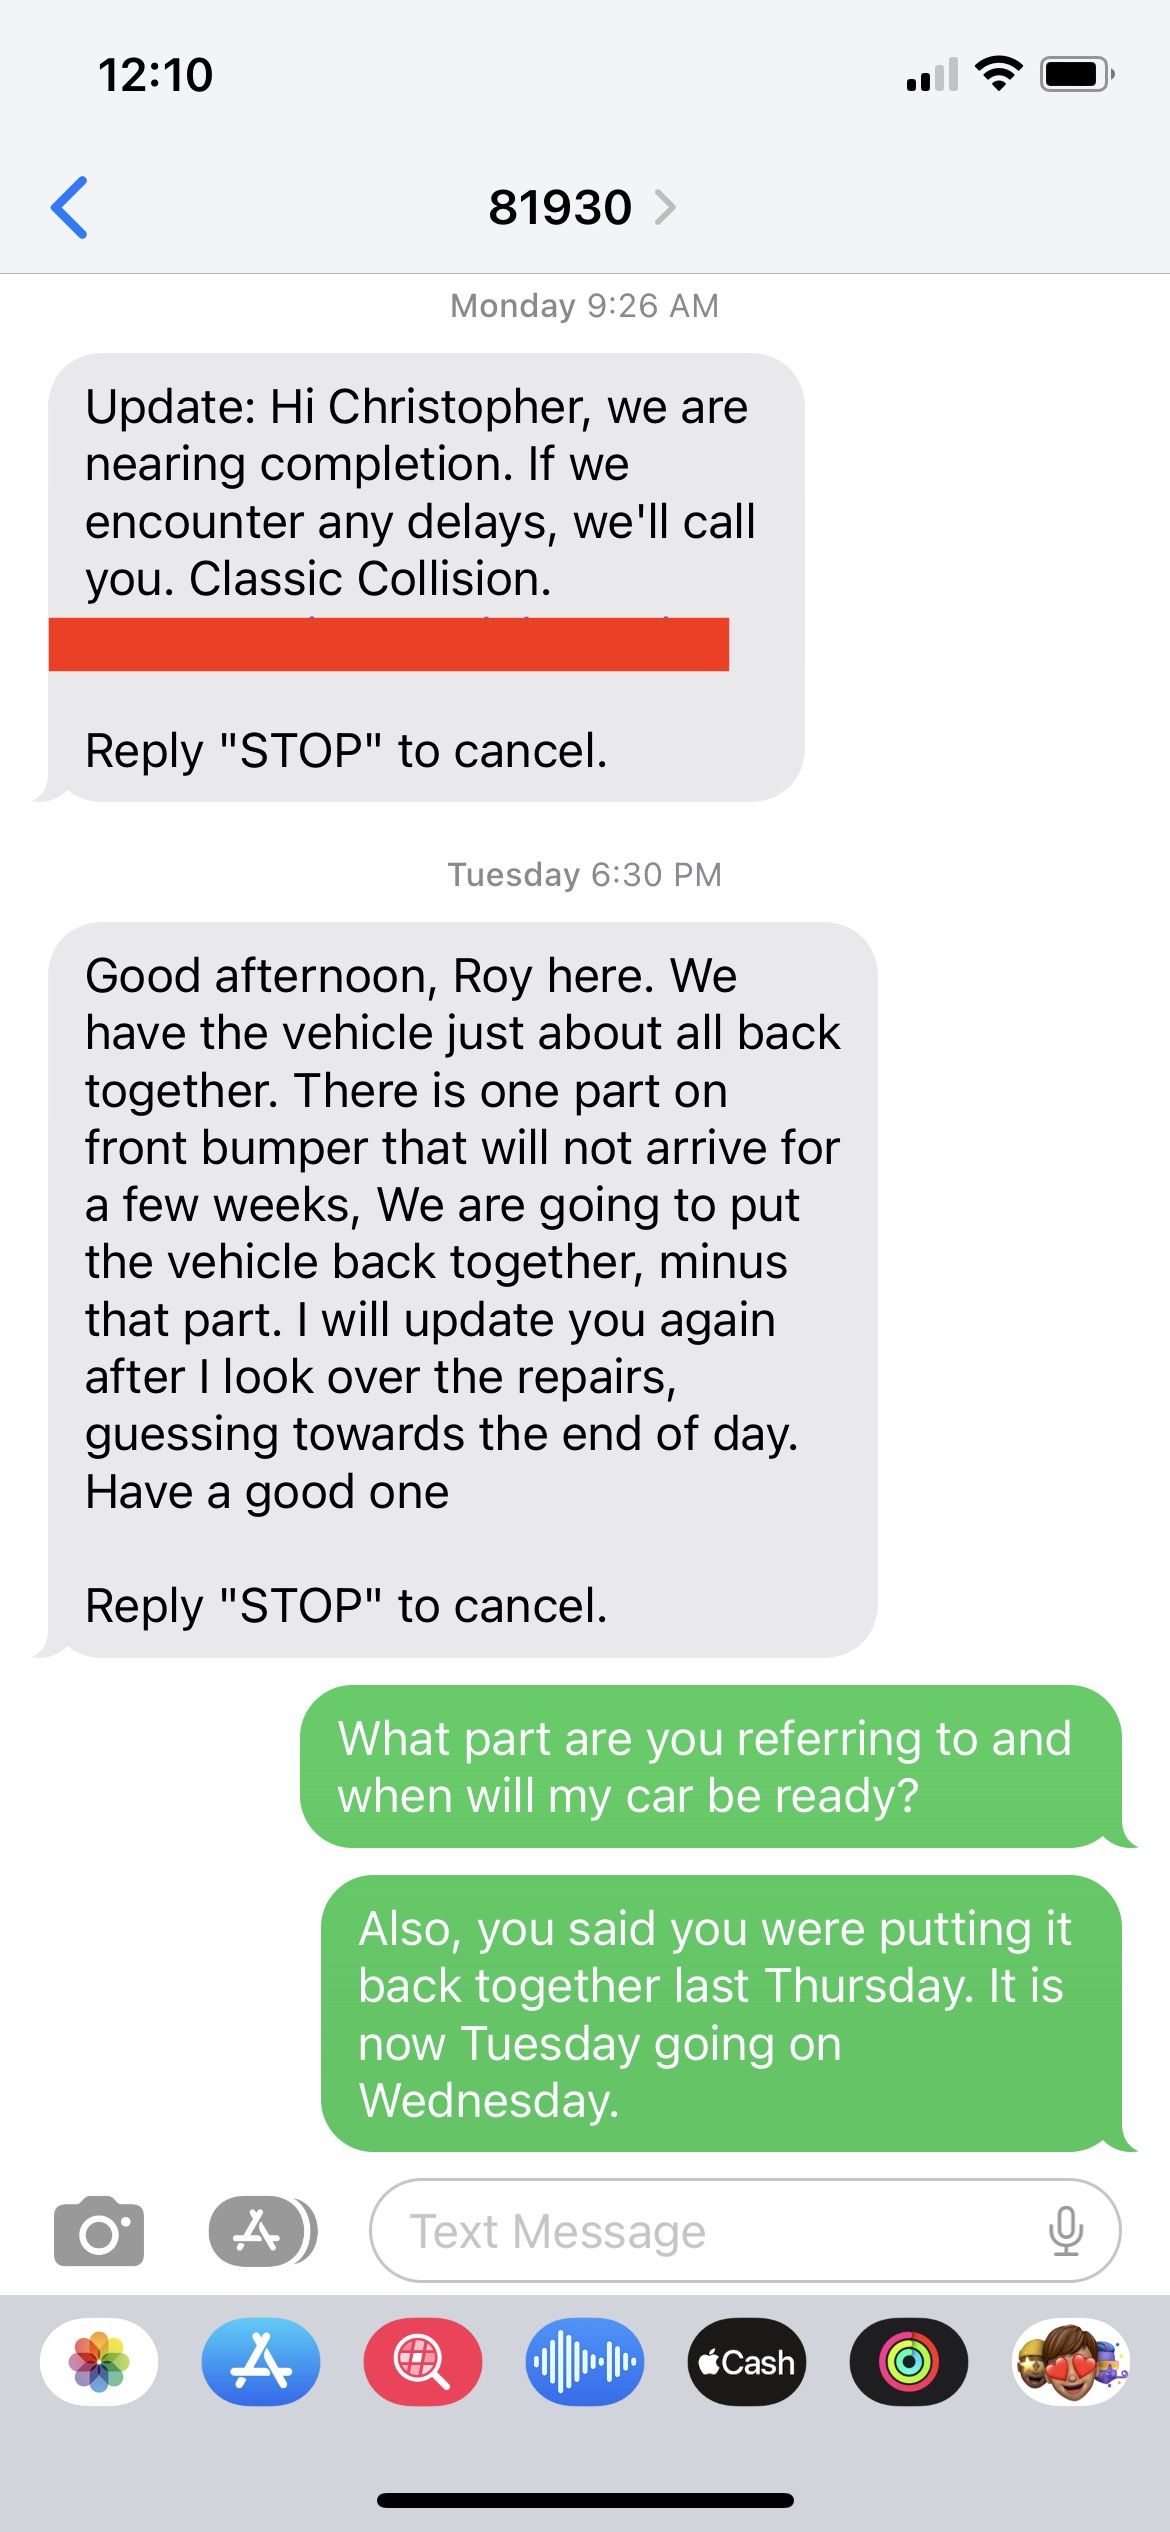 GEICO and Classic Collission Conversation